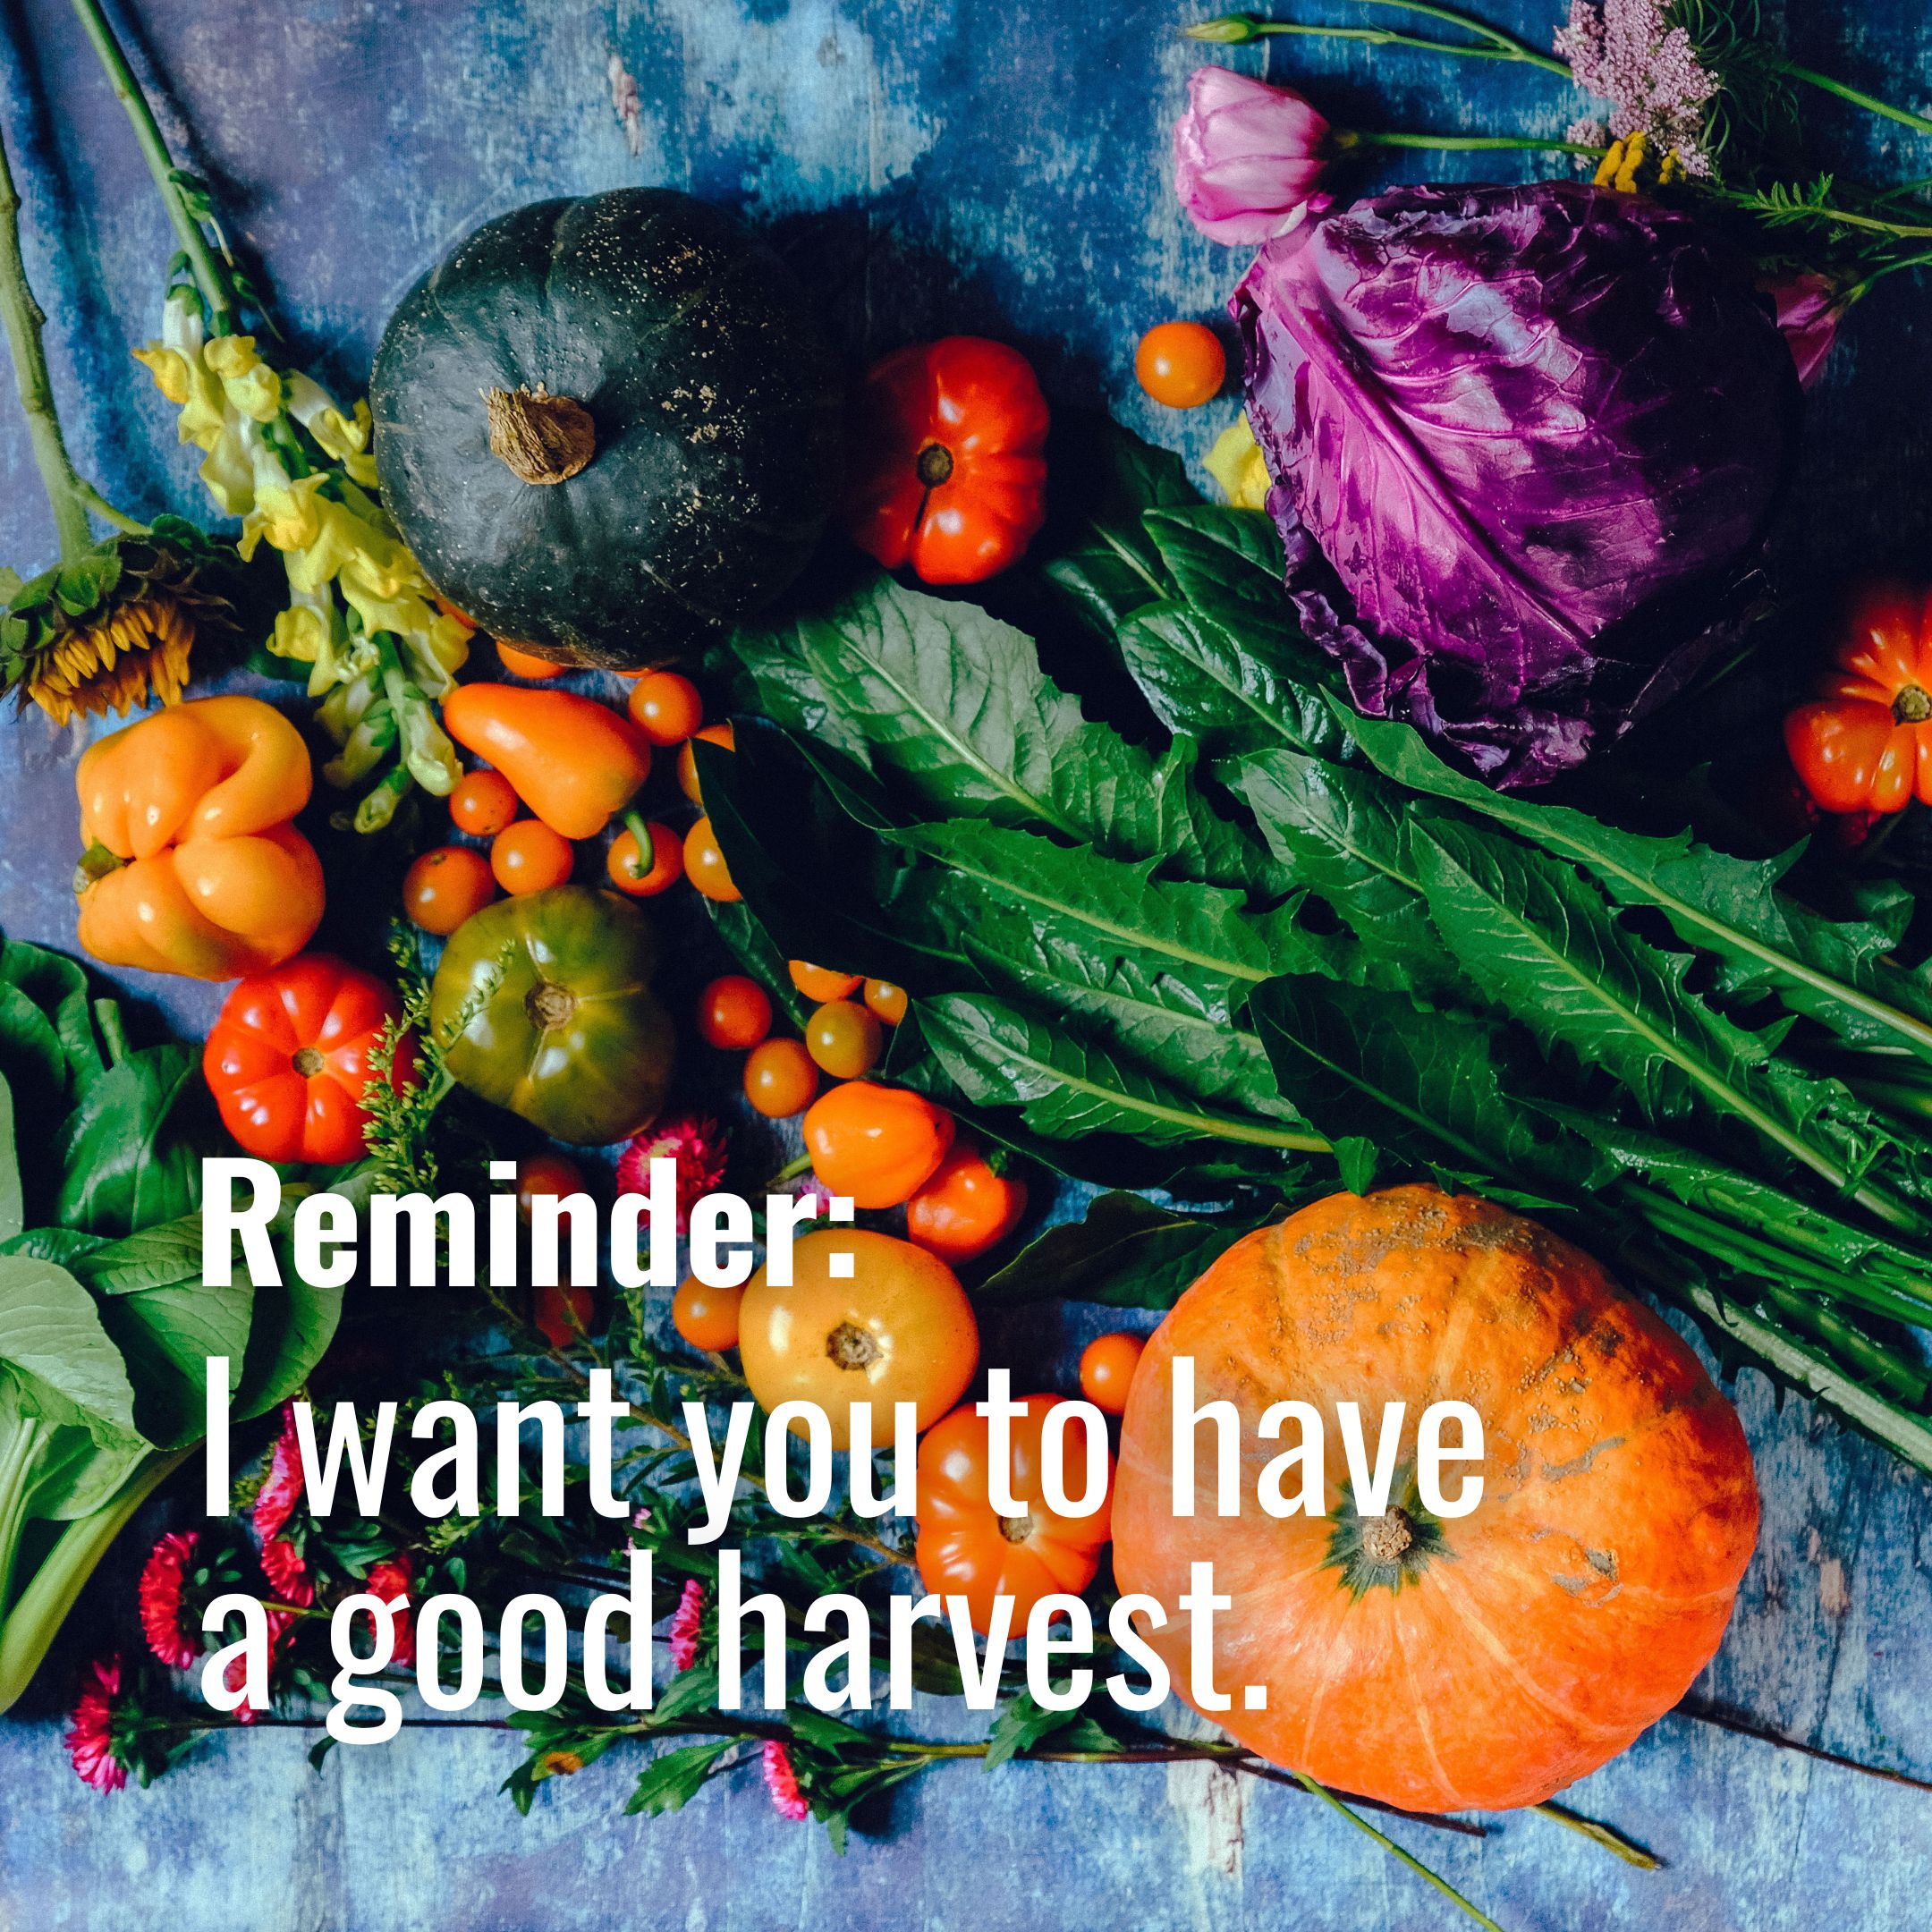 I want you to have a good harvest.